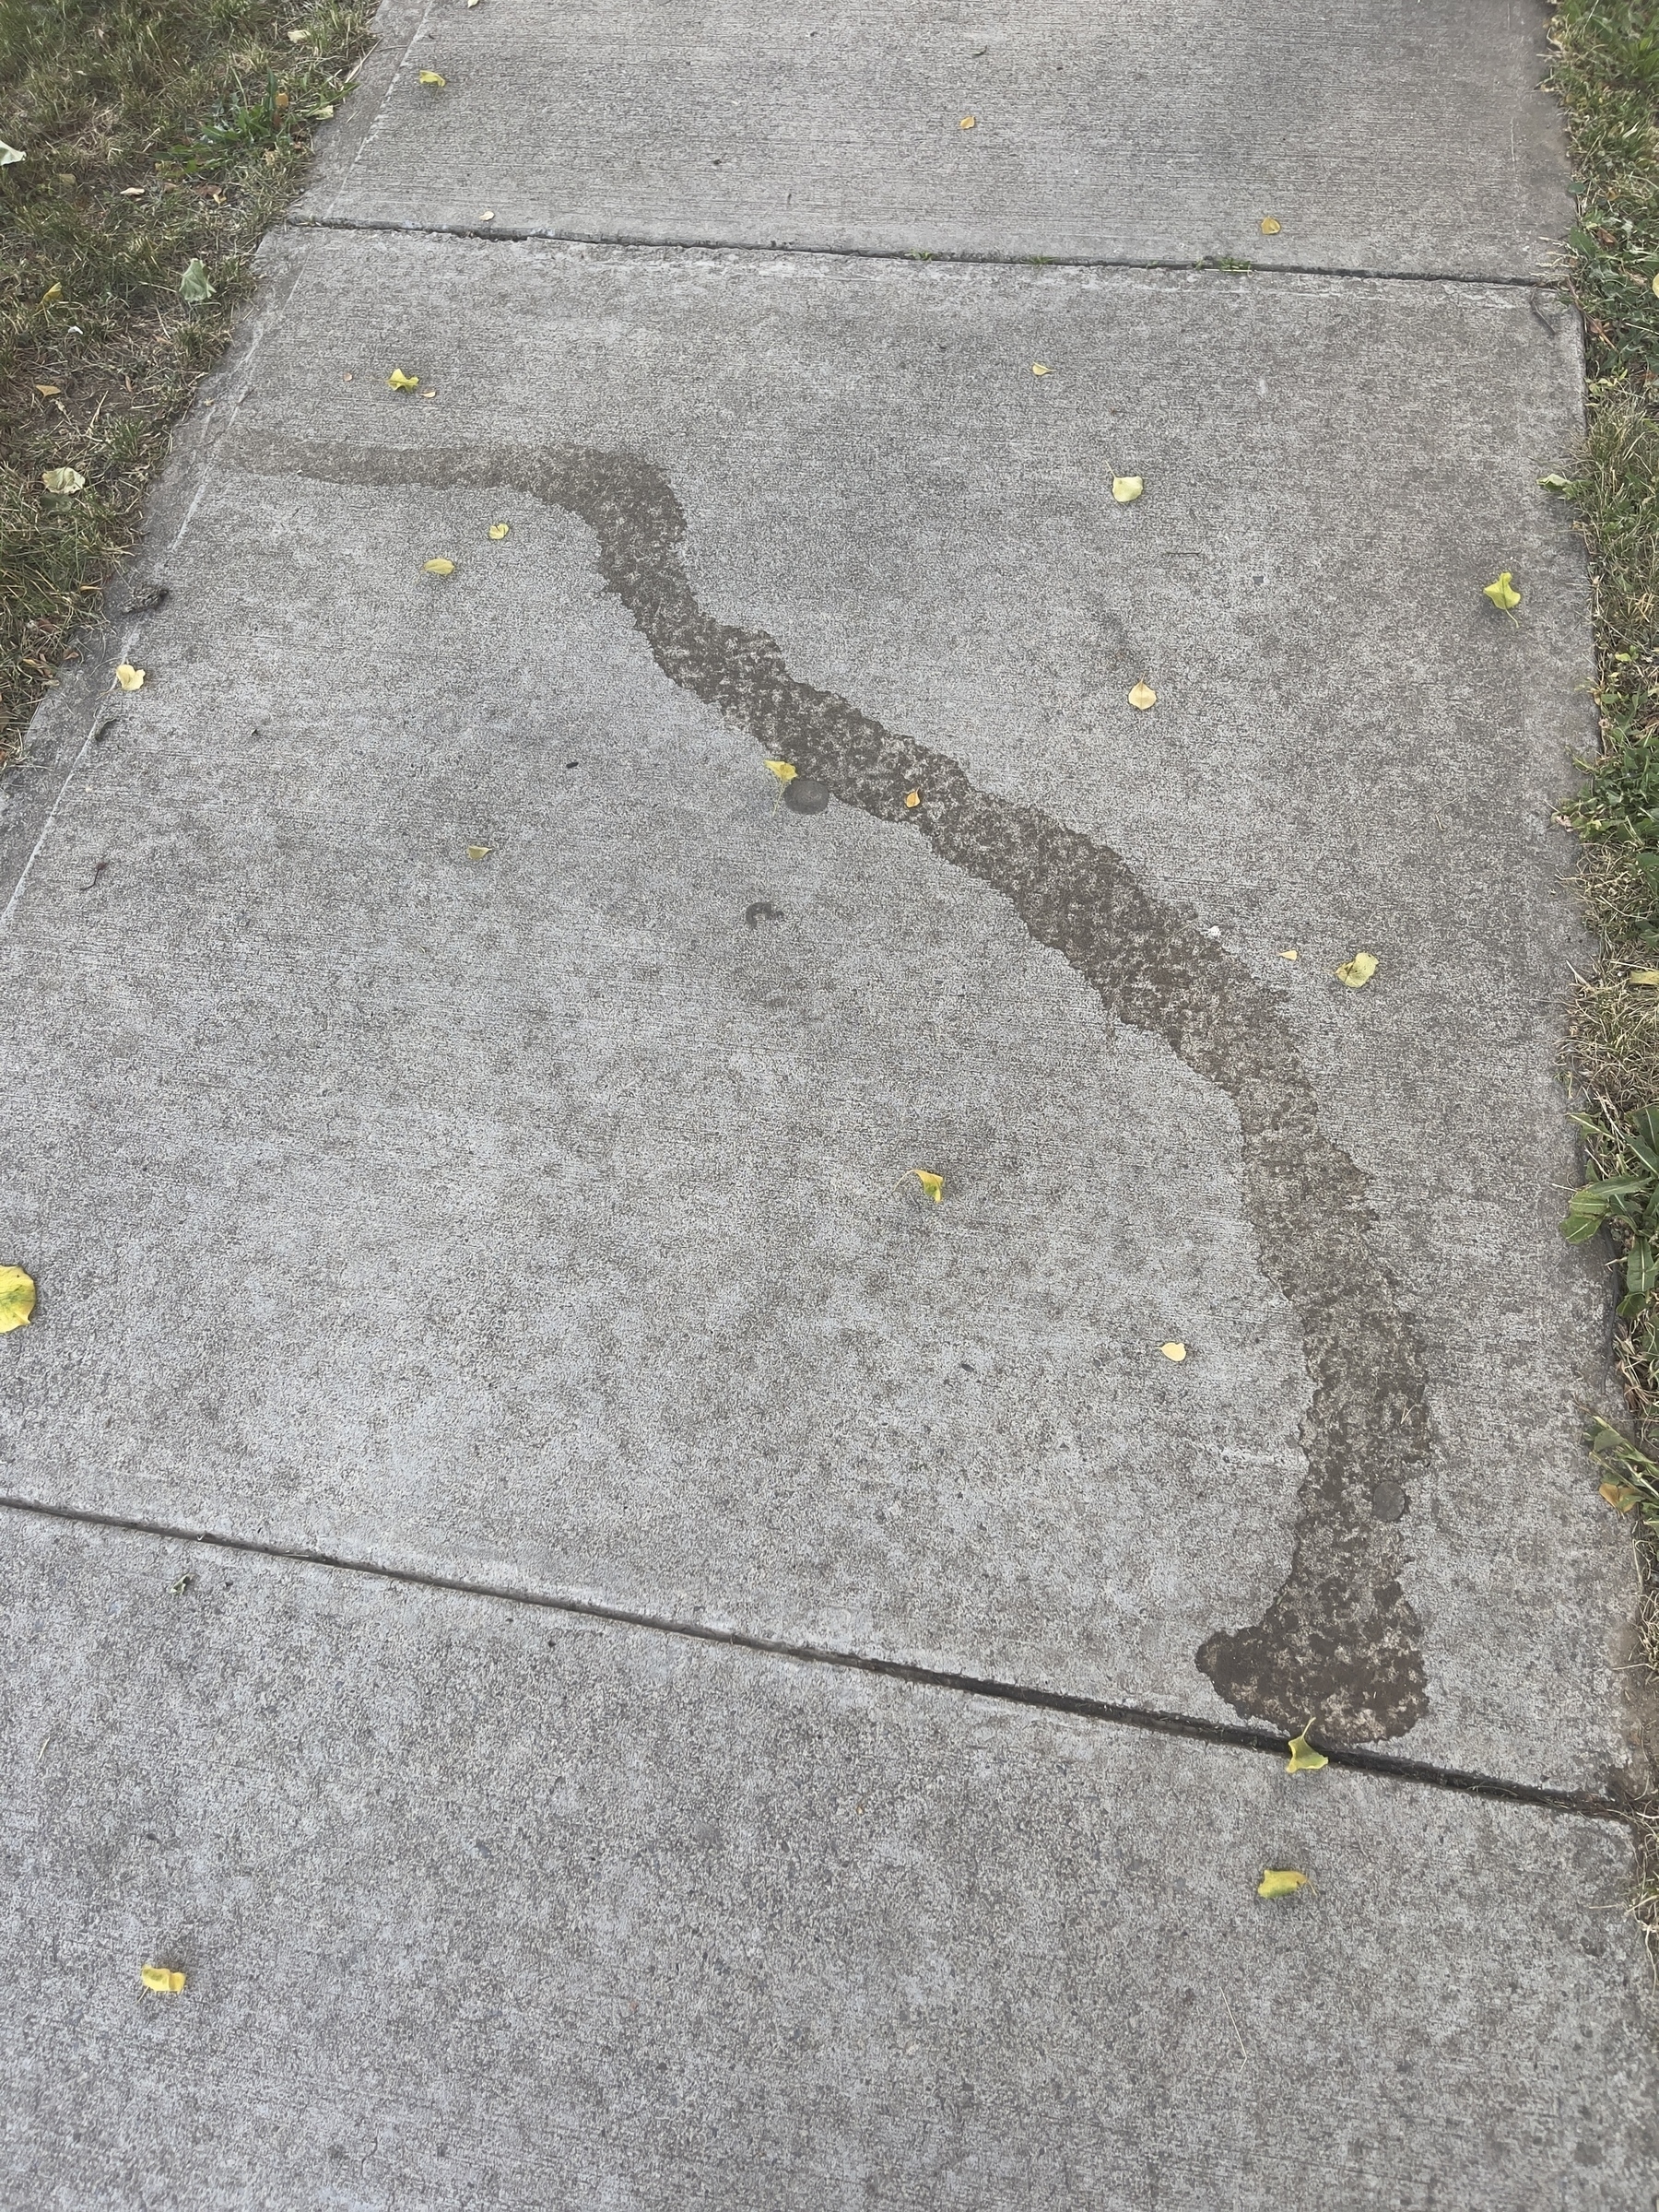 Curved linear stain on concrete sidewalk.